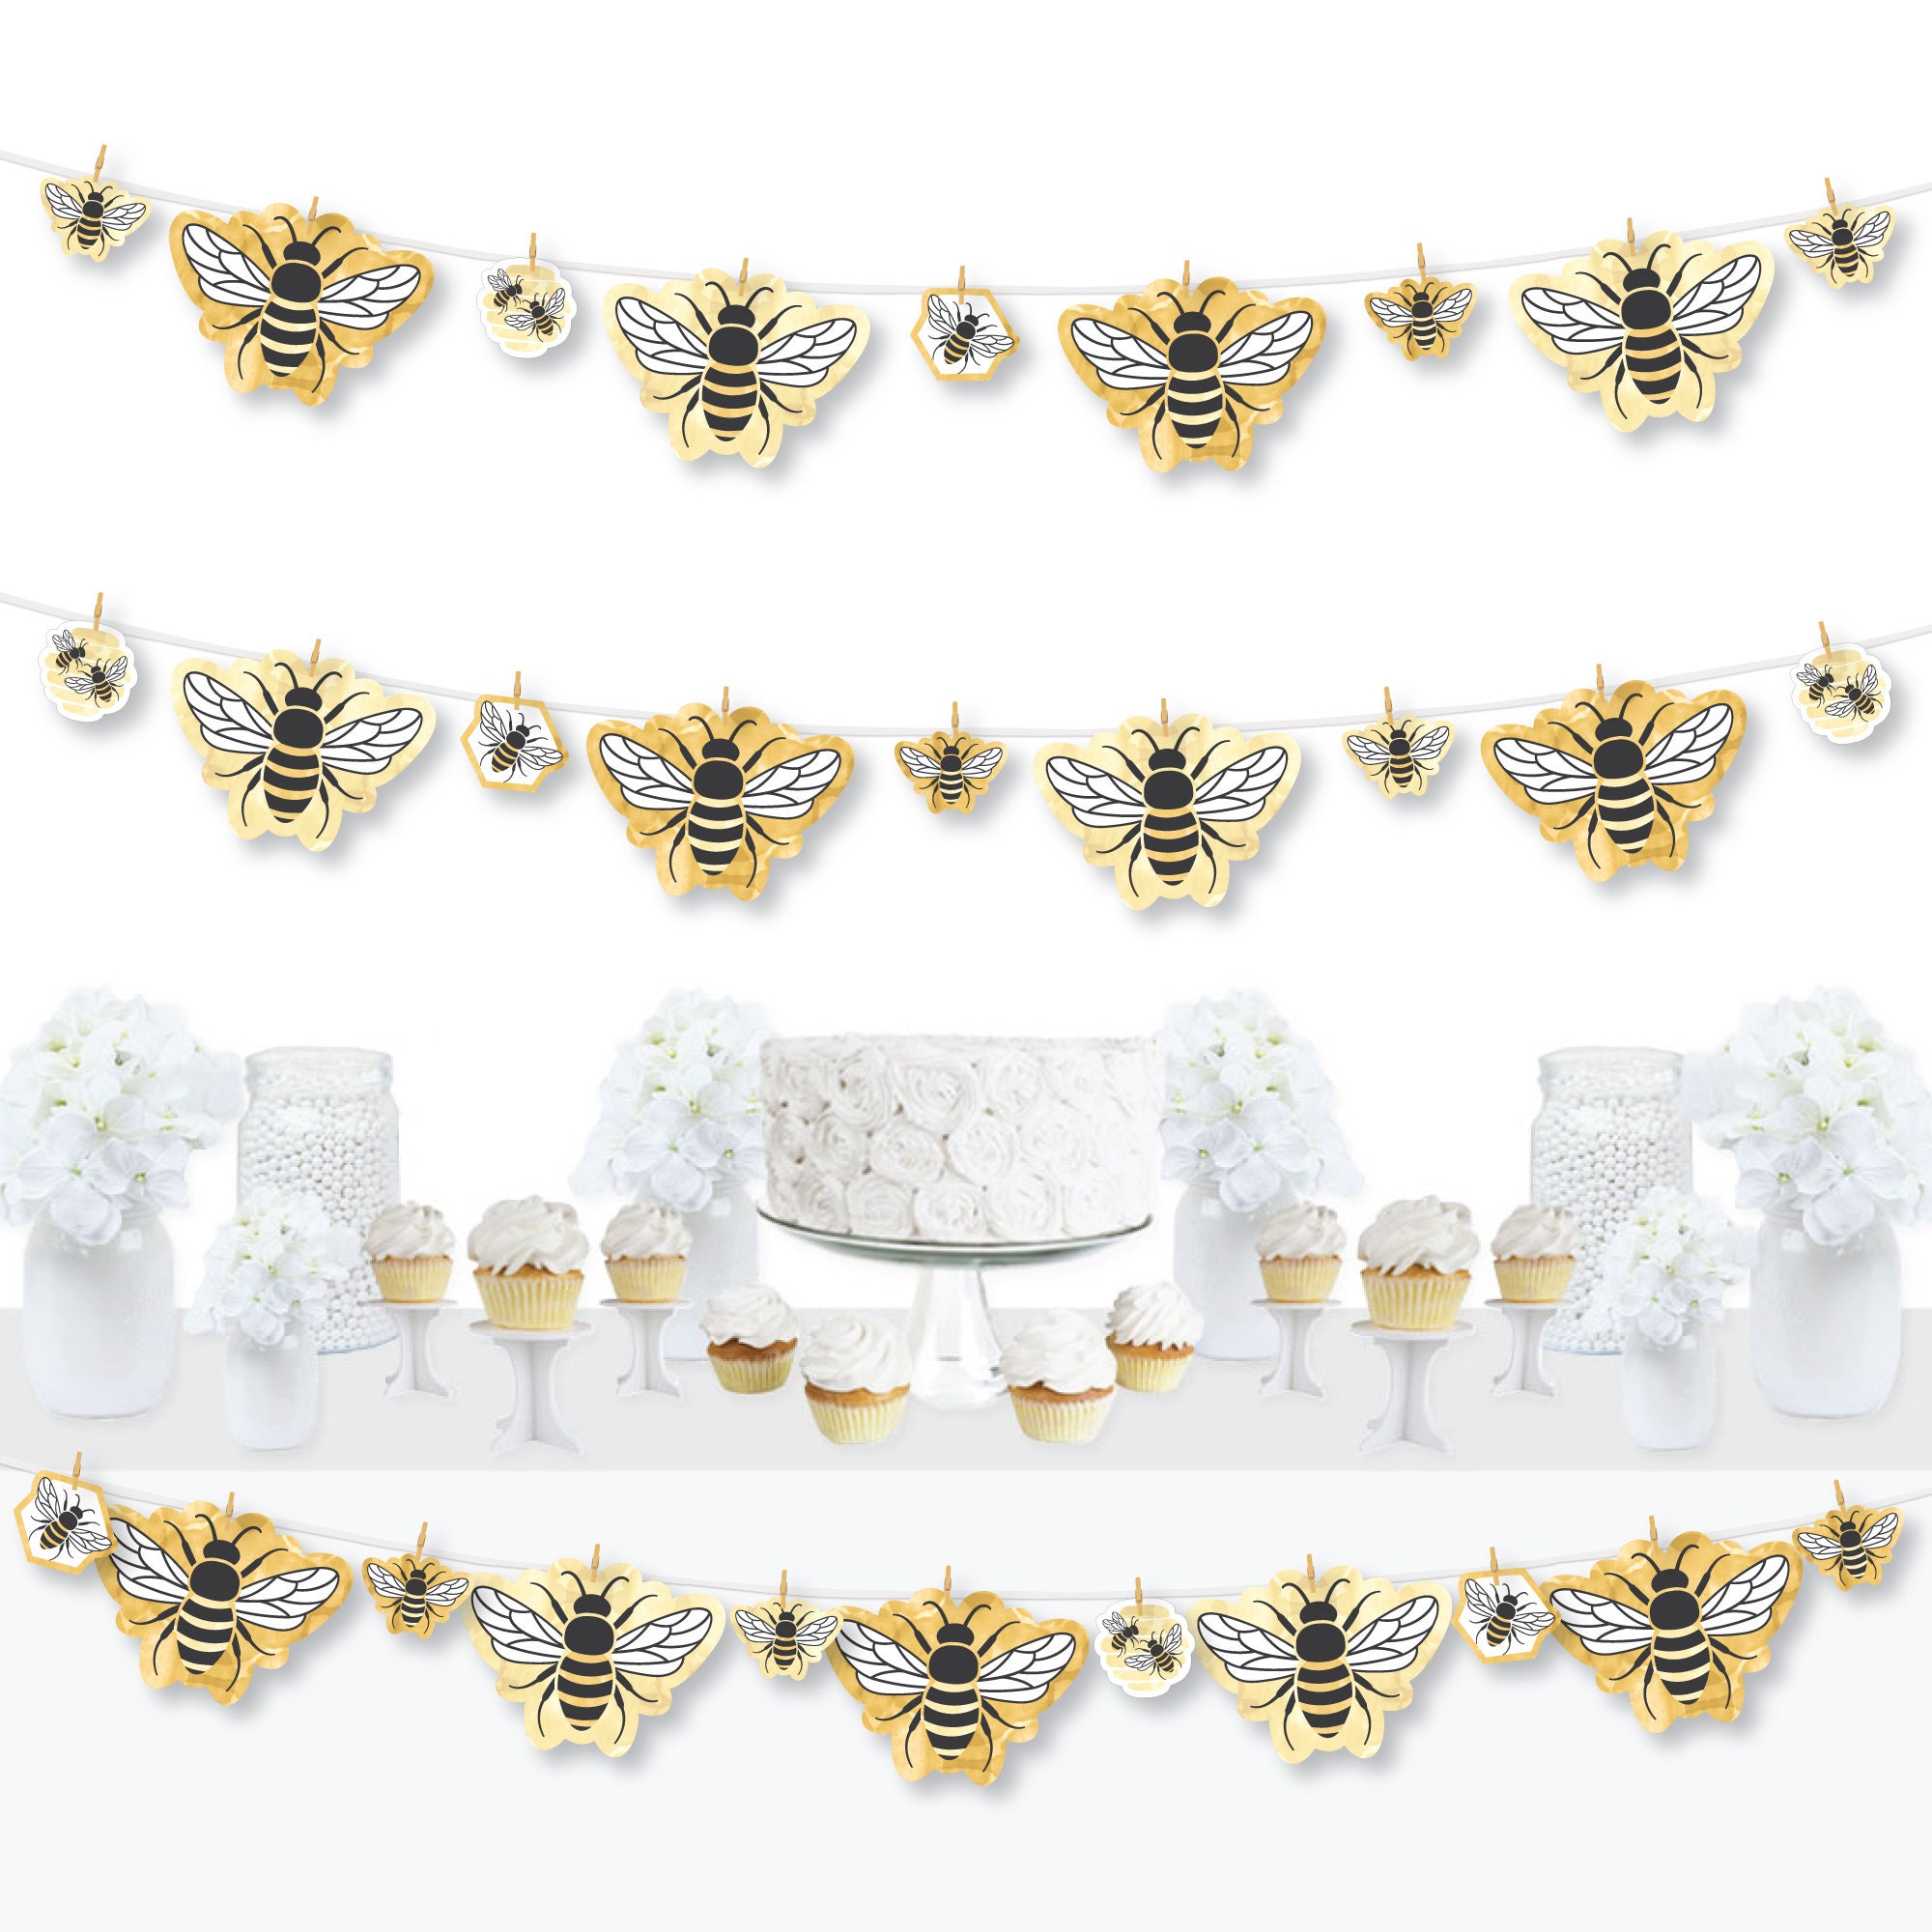 Bumble Bee Baby Shower Hanging Decorations (Yellow, Gold, 90